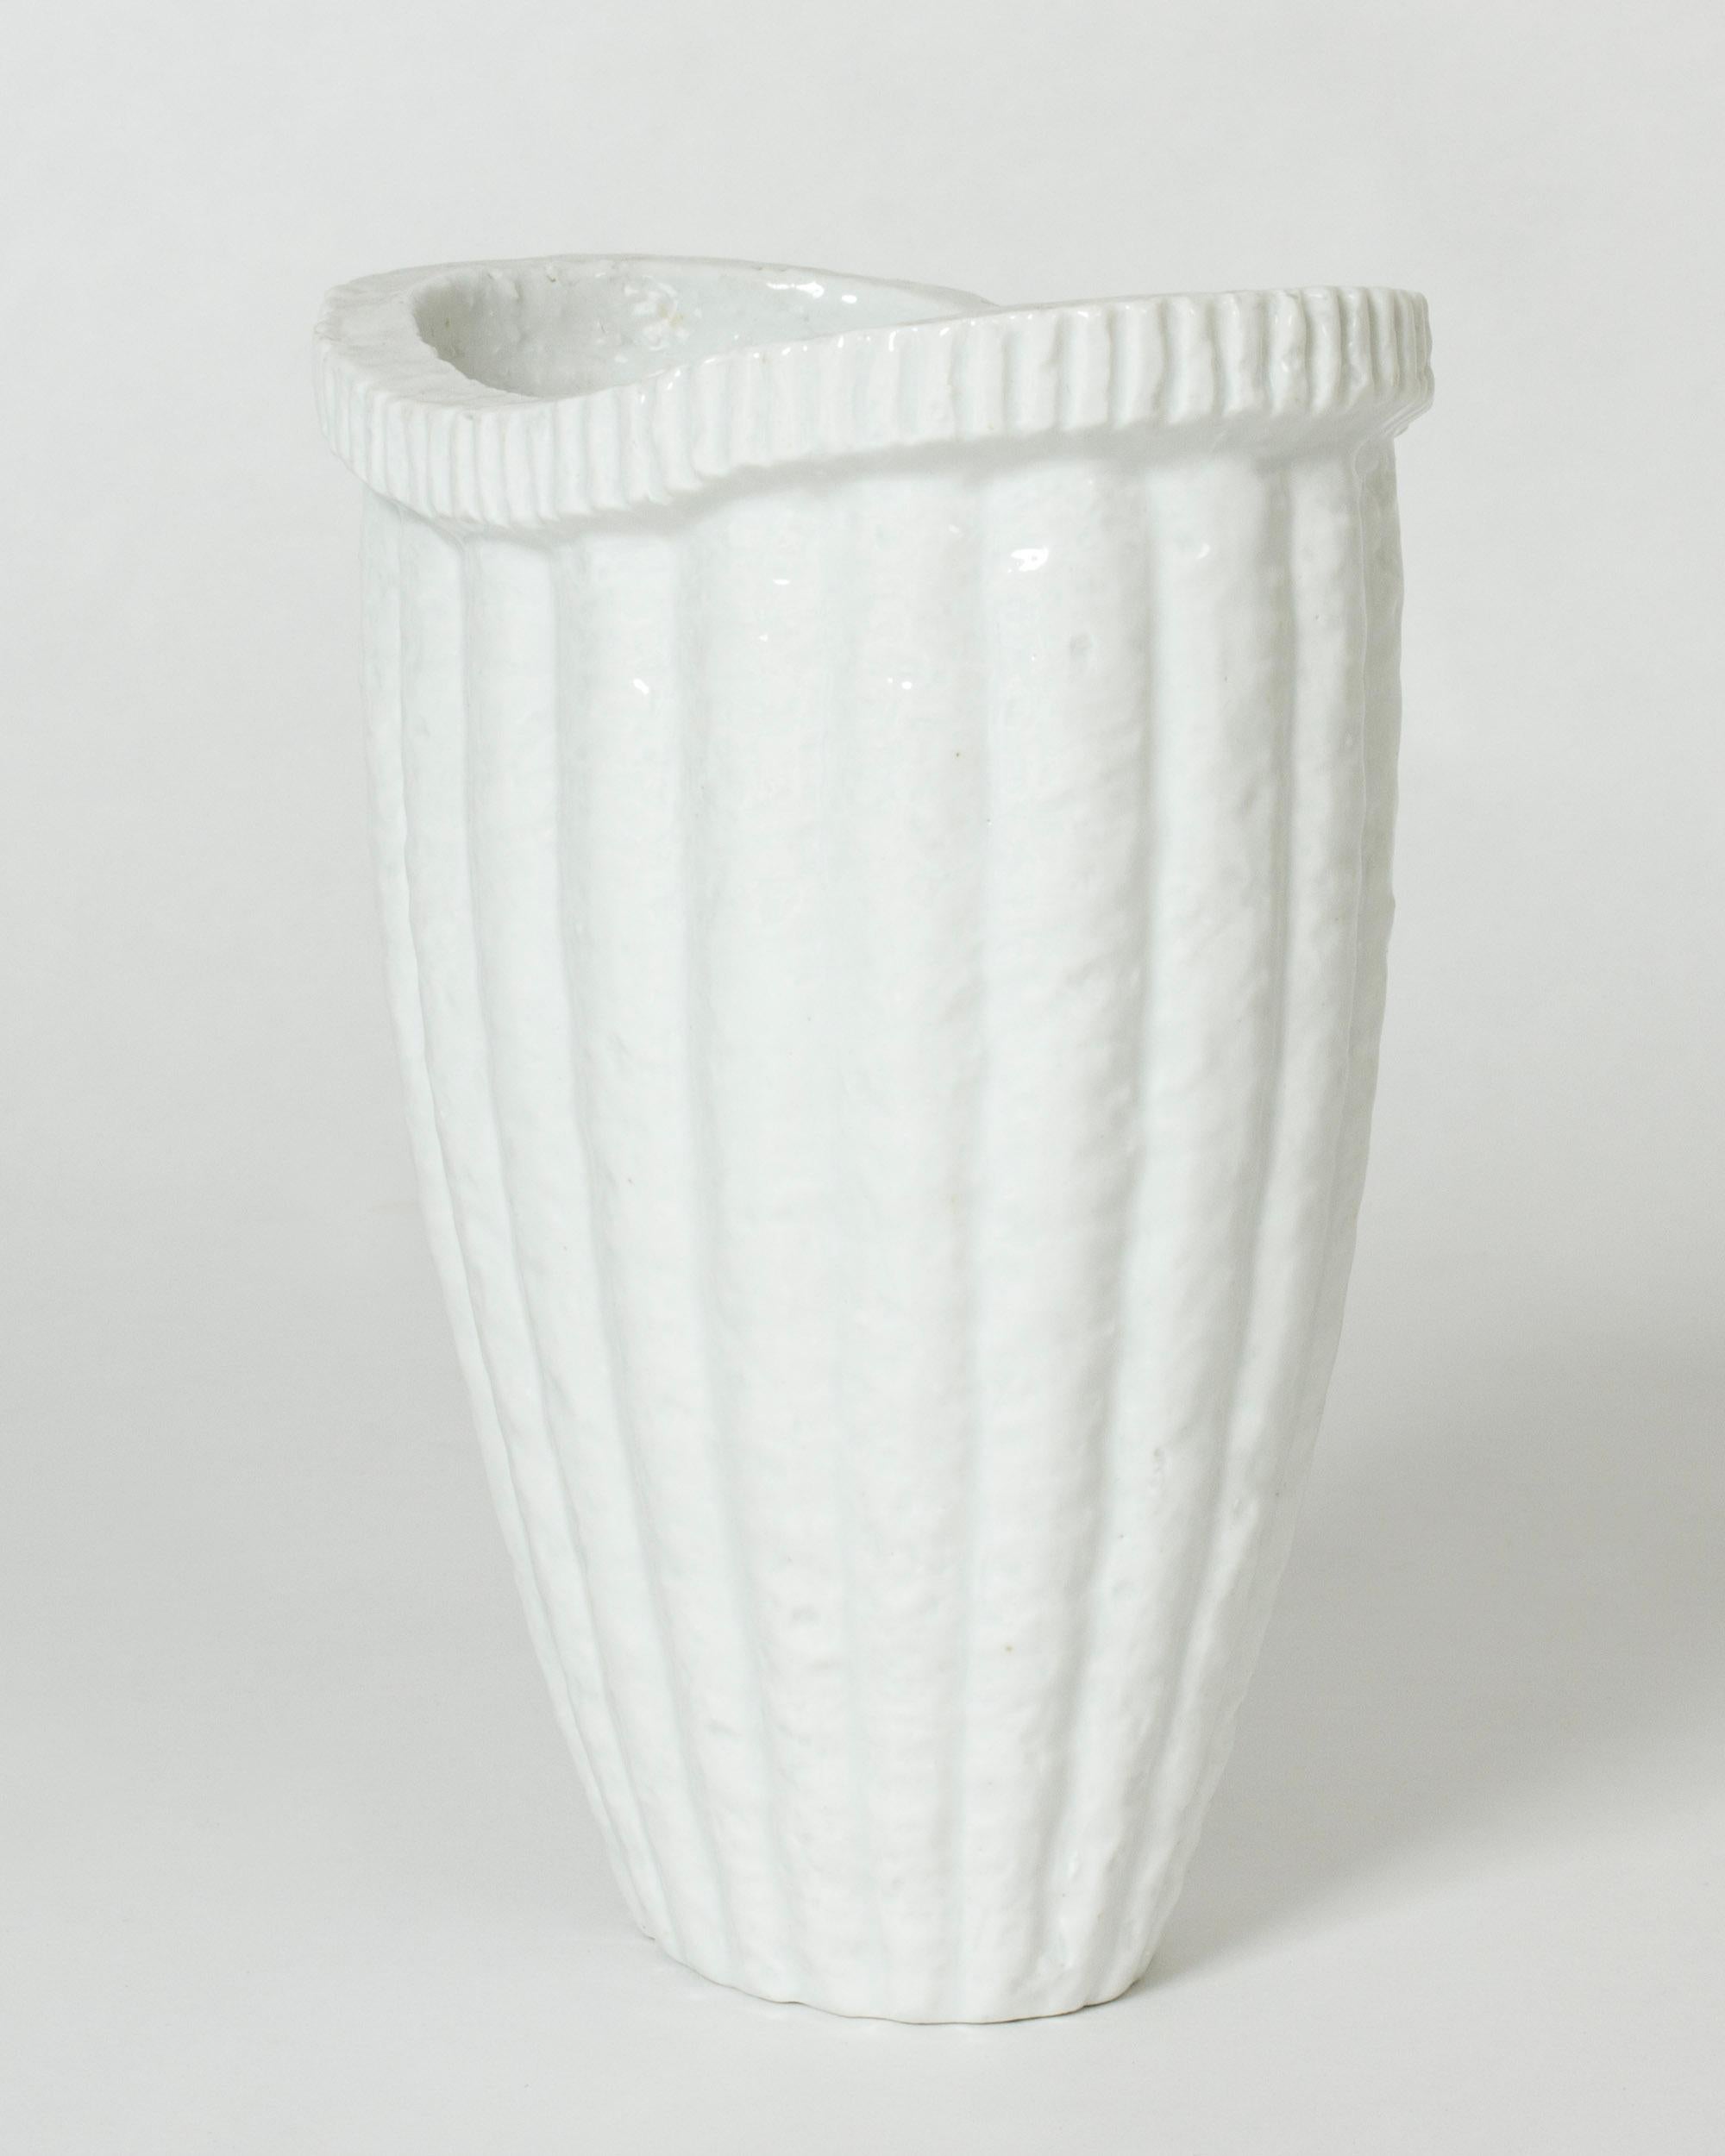 Elegant “Chamotte” stoneware vase by Gunnar Nylund, in a stately form. Made in a technique where crushed earthenware is mixed into the stoneware.

Rörstrand introduced Gunnar Nylund’s chamotte stoneware series including a number of vessel designs in